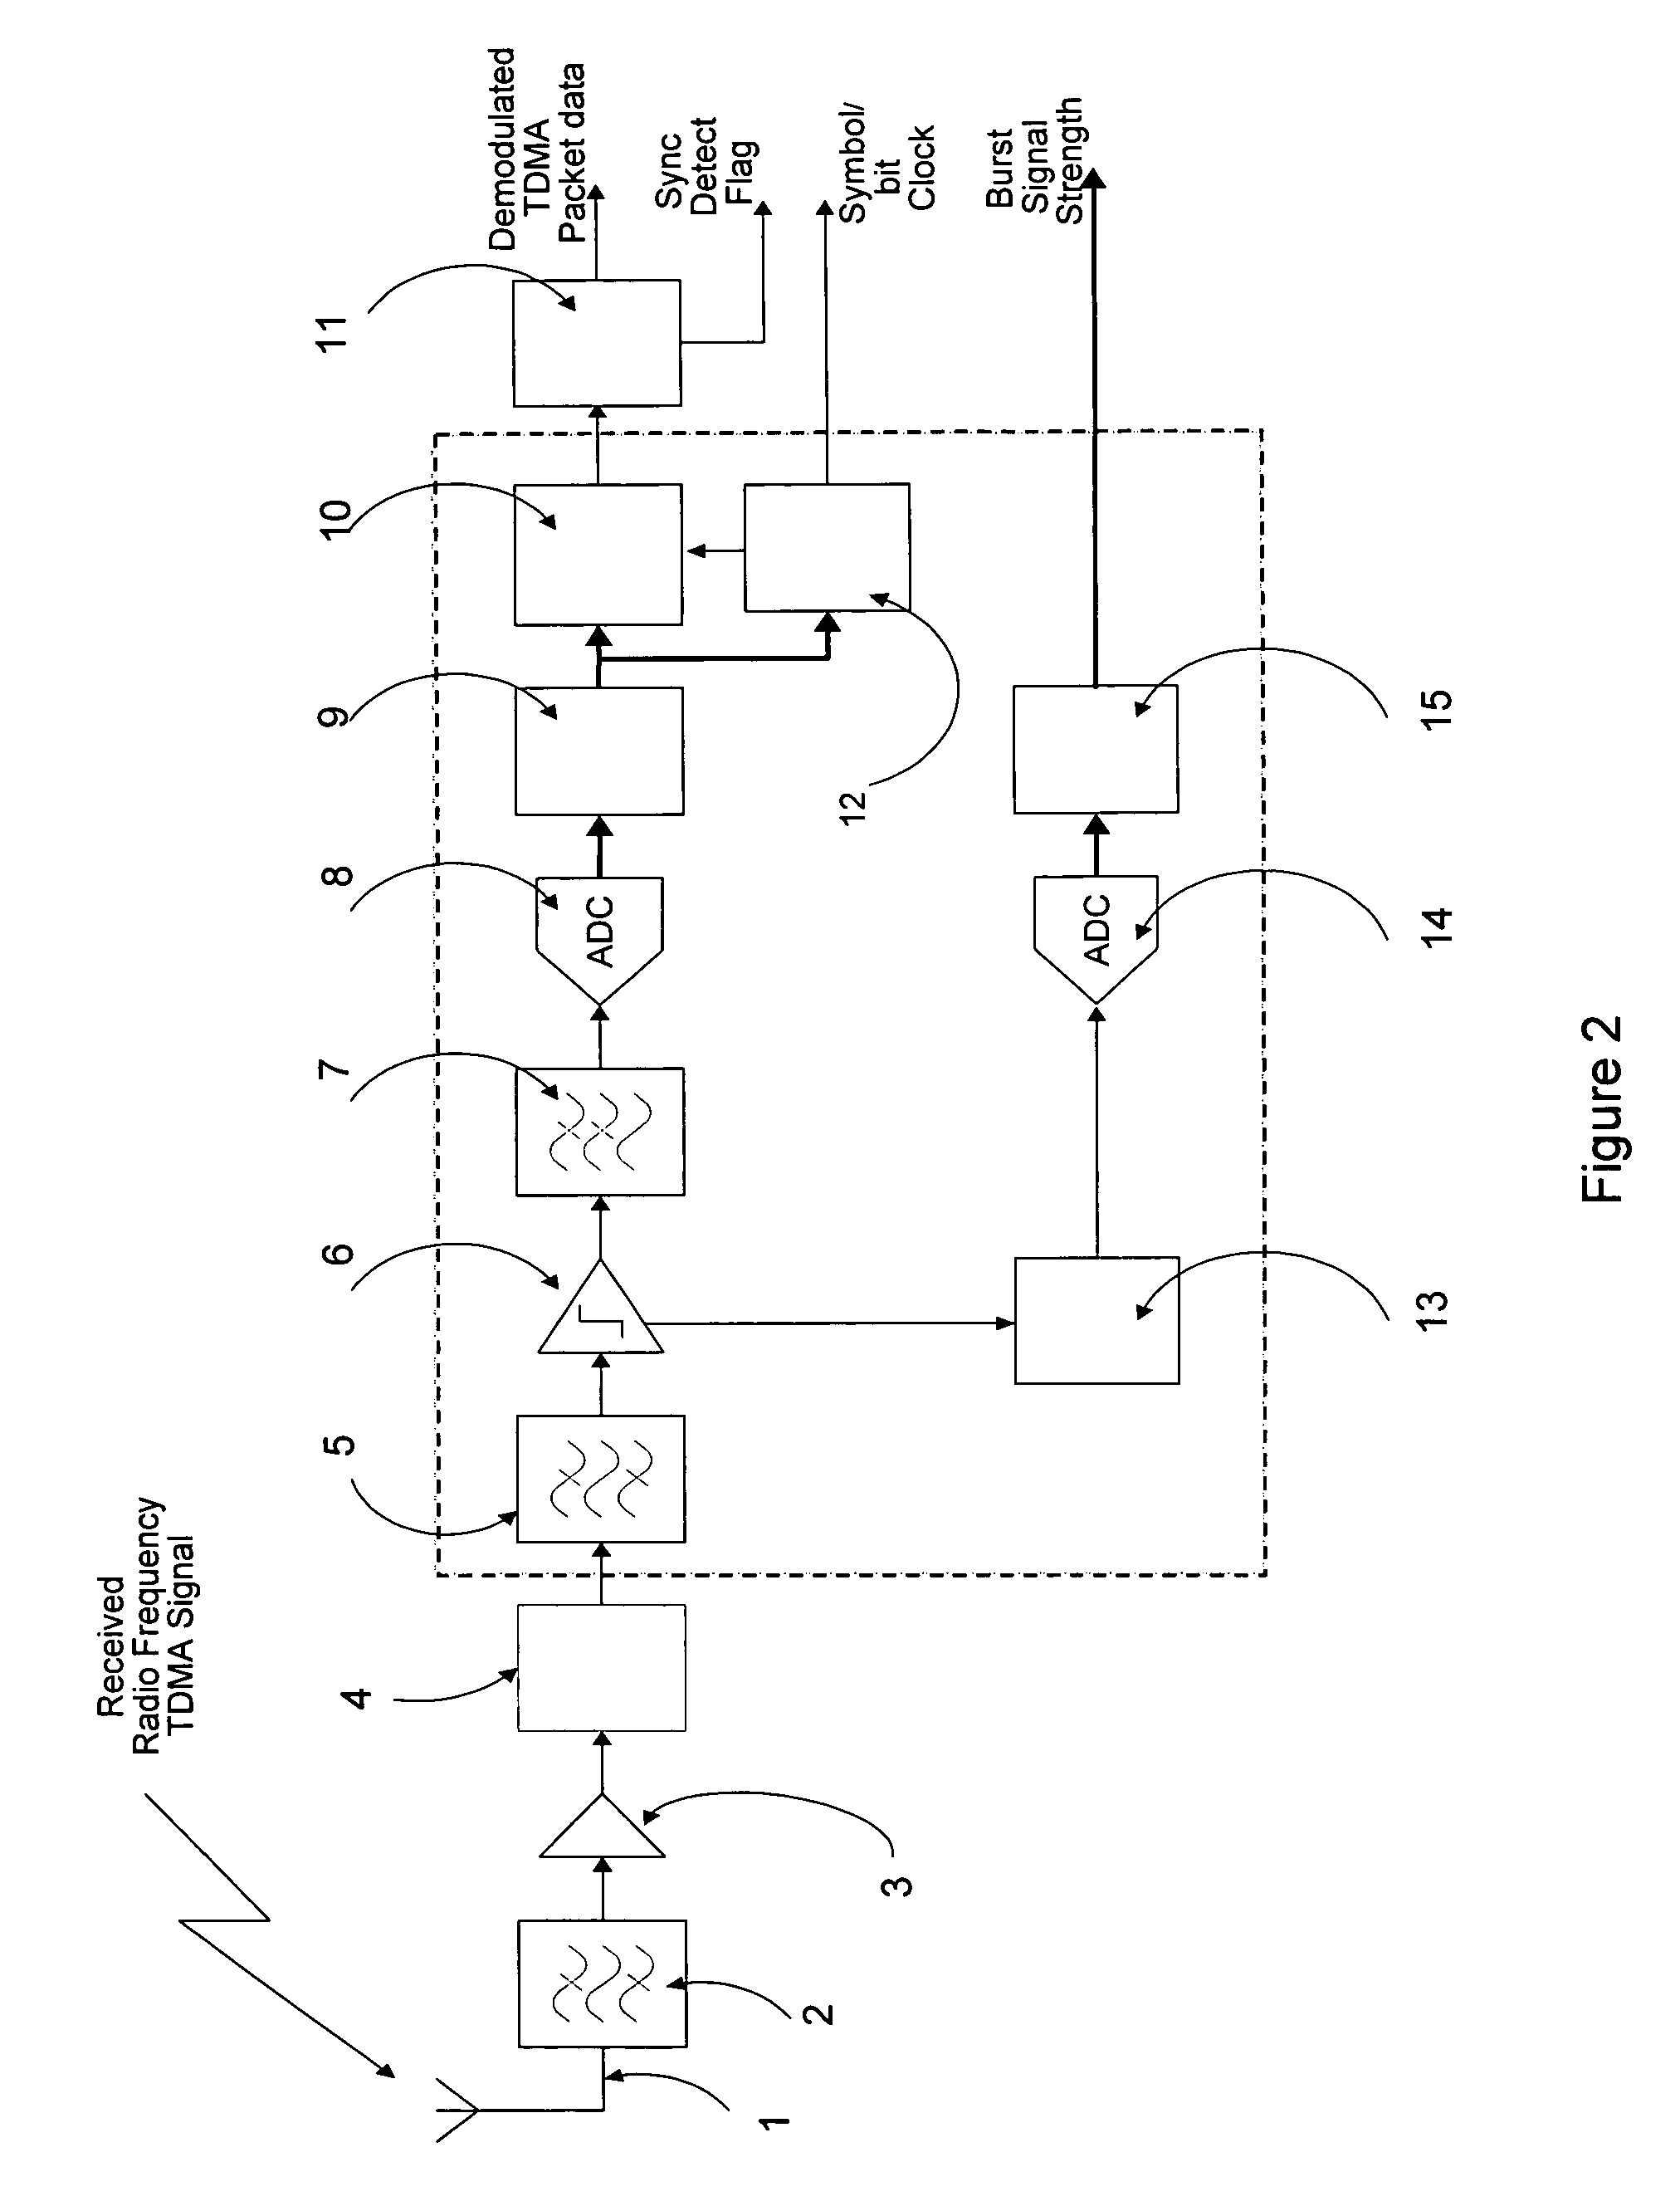 Demodulation with separate branches for phase and amplitude